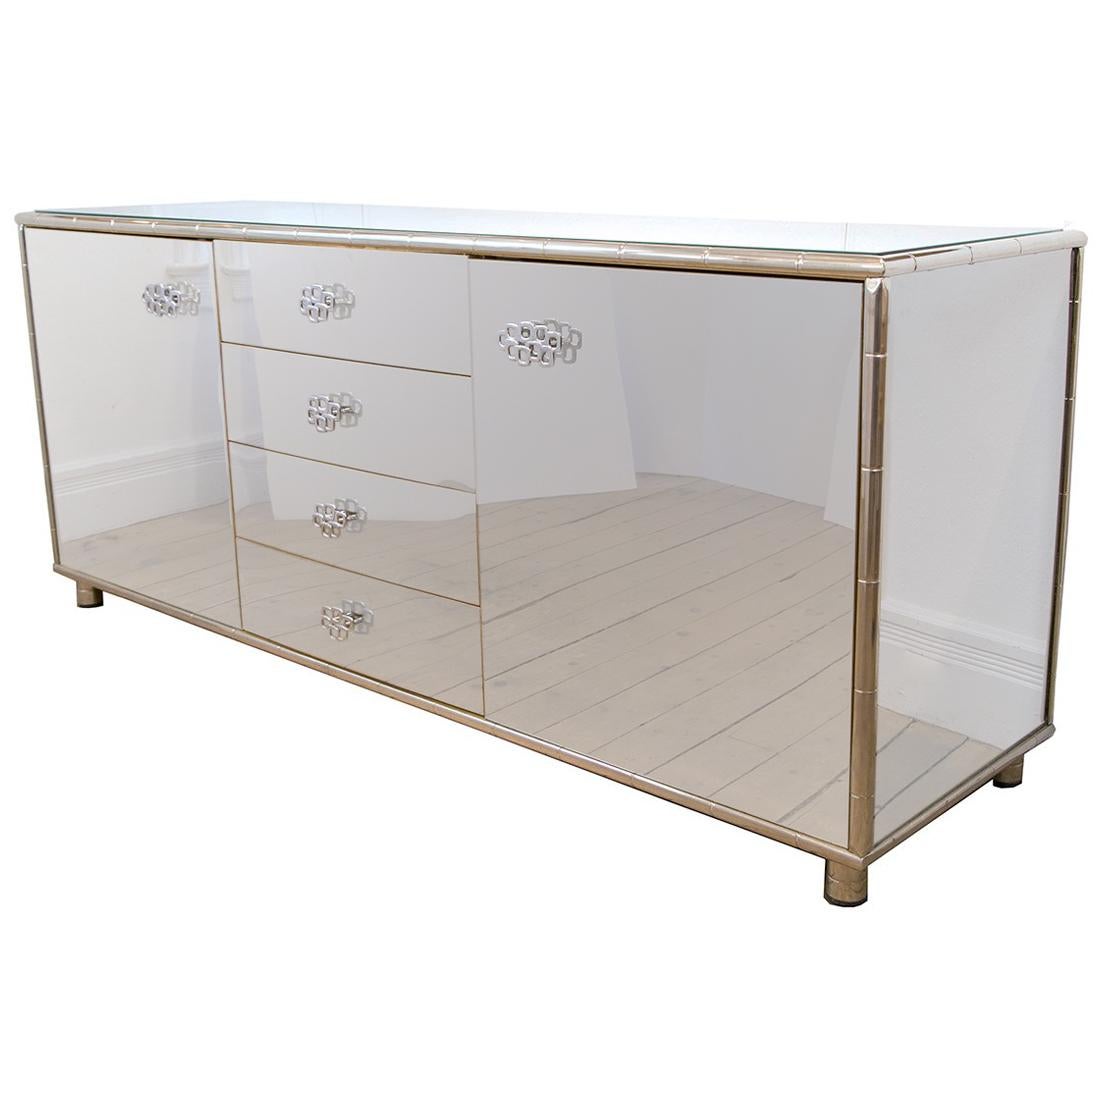 Rectangular Stainless Steel Cabinet with Faux Bamboo and Brass Details